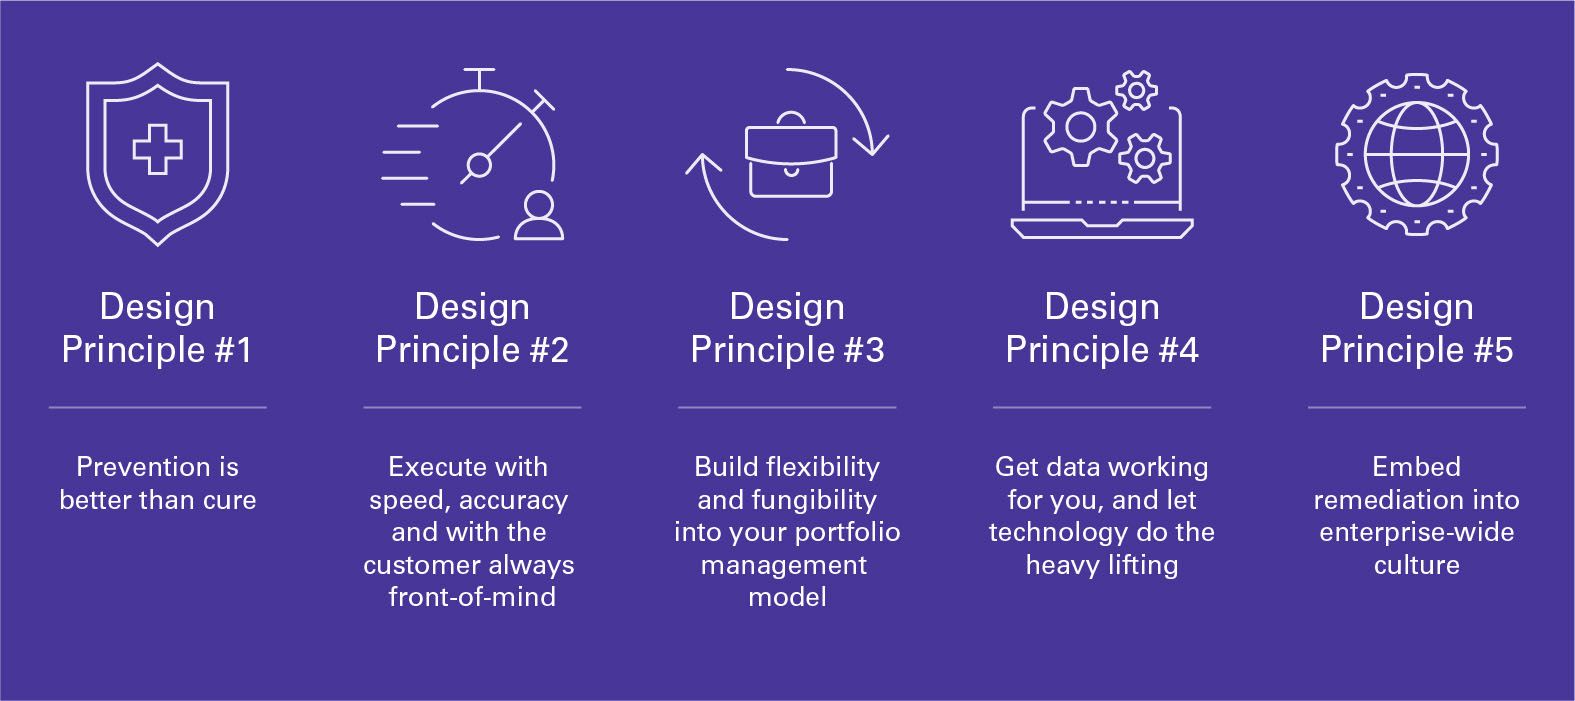 KPMG's five design principles to foster successful remediation execution, highlighting customer needs.